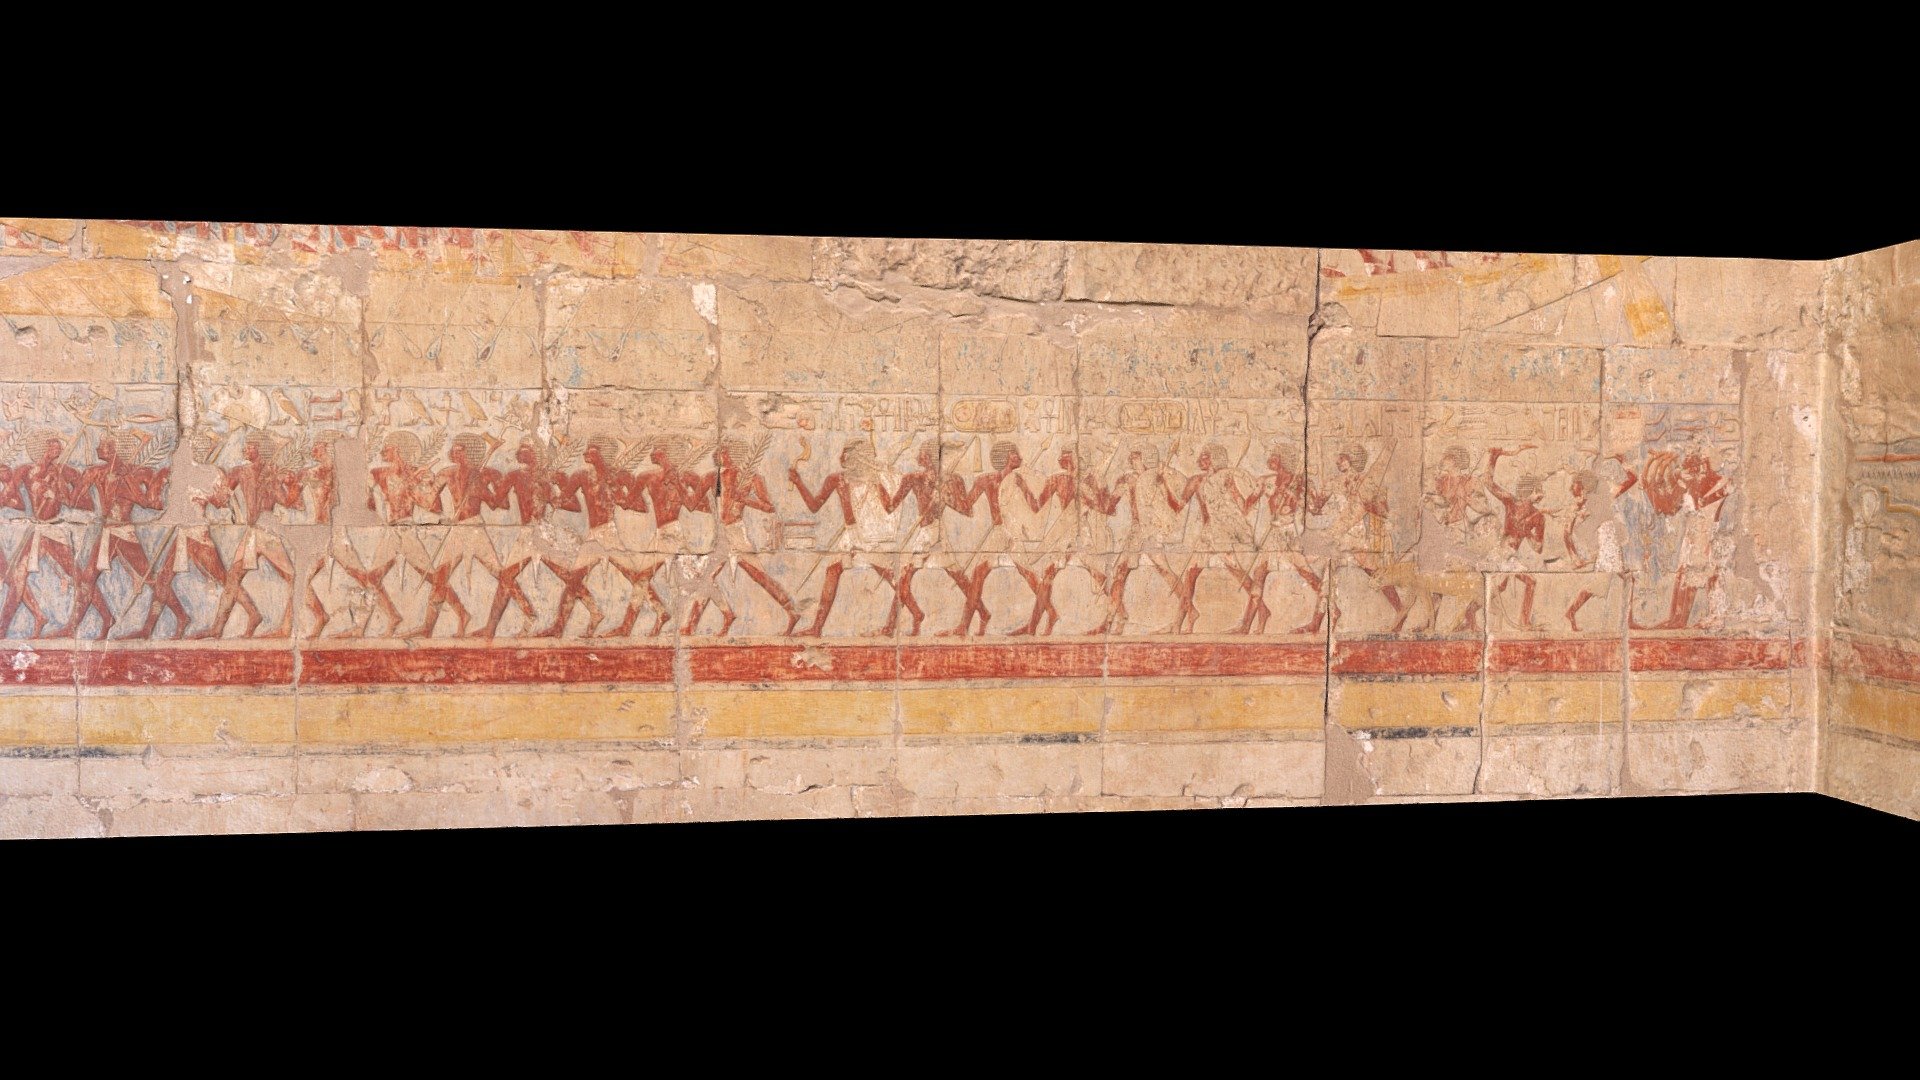 A parade of soldiers on the northern wall of the Hypostyle Hall of the Hathor Chapel at the Temple of Hatshepsut at Deir el-Bahri, Egypt.

Created from 61 photographs (Canon EOS Rebel T7i) using Metashape 1.8.4.  Downgraded from original 3M polygon model.  Photographed in January 2024 3d model